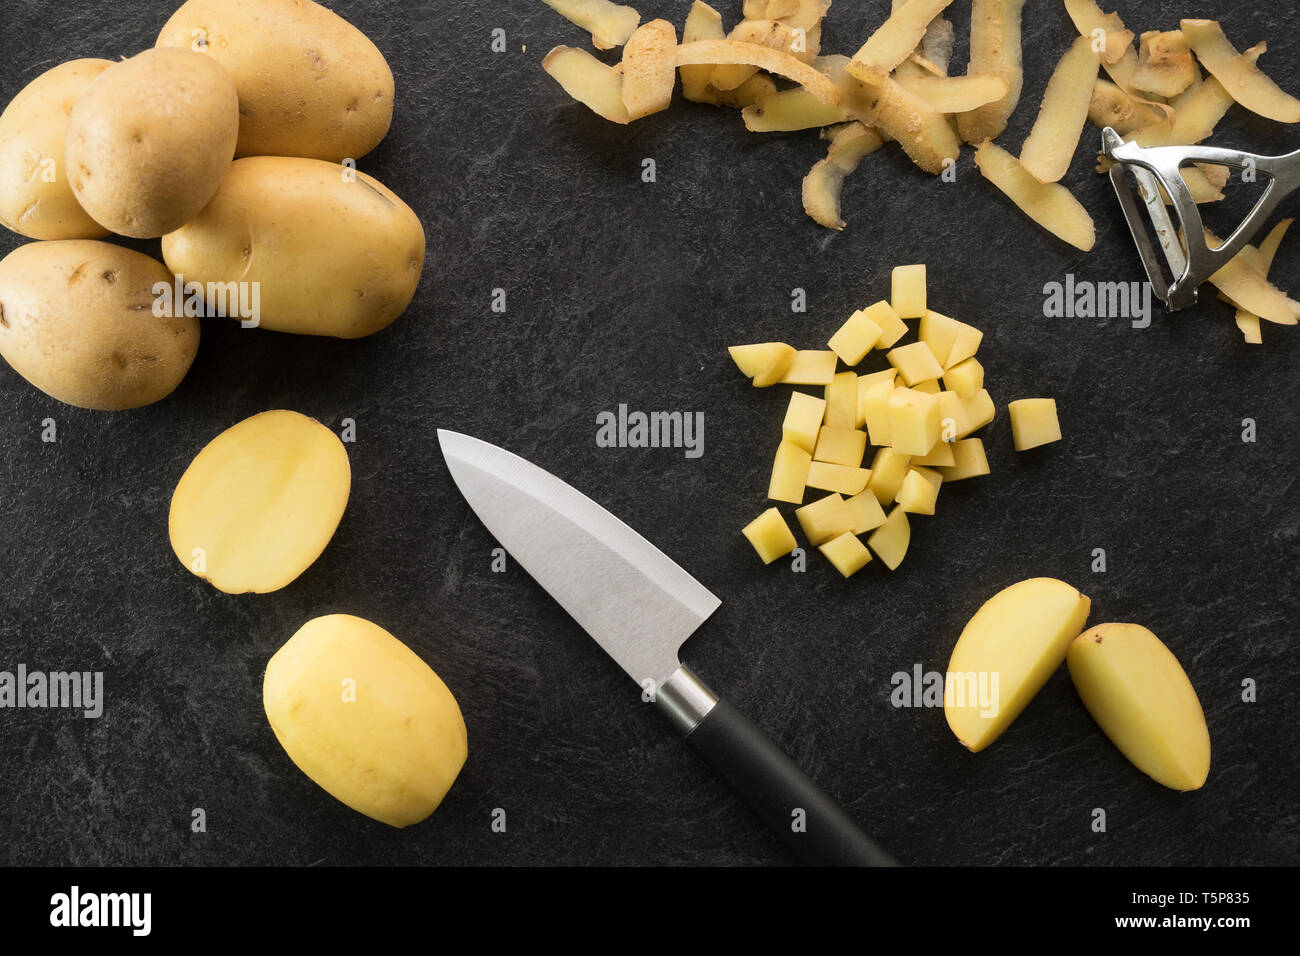 https://c8.alamy.com/comp/T5P835/knife-cutting-potatoes-on-textured-black-background-photo-from-above-T5P835.jpg